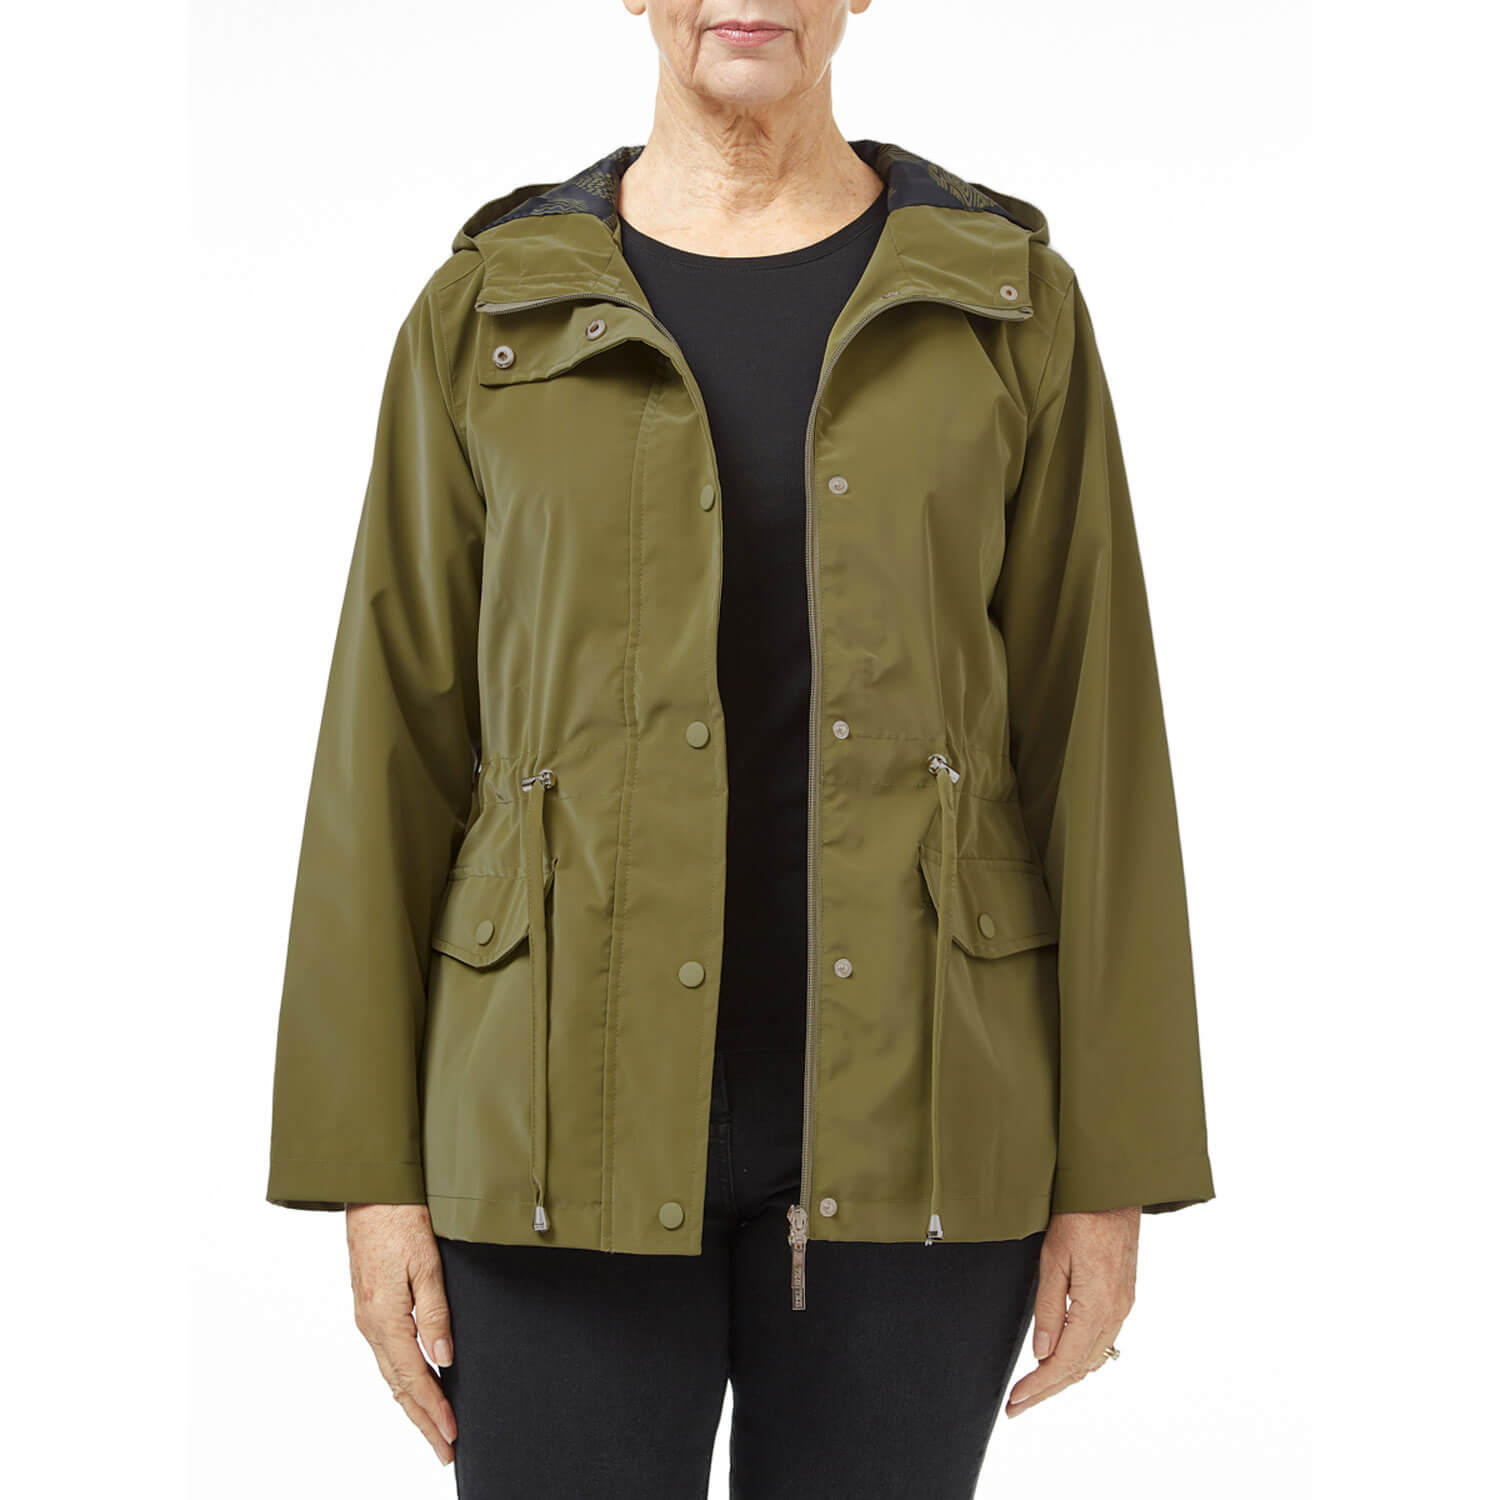 Tigiwear Moss Hooded Spring Coat 2 Shaws Department Stores